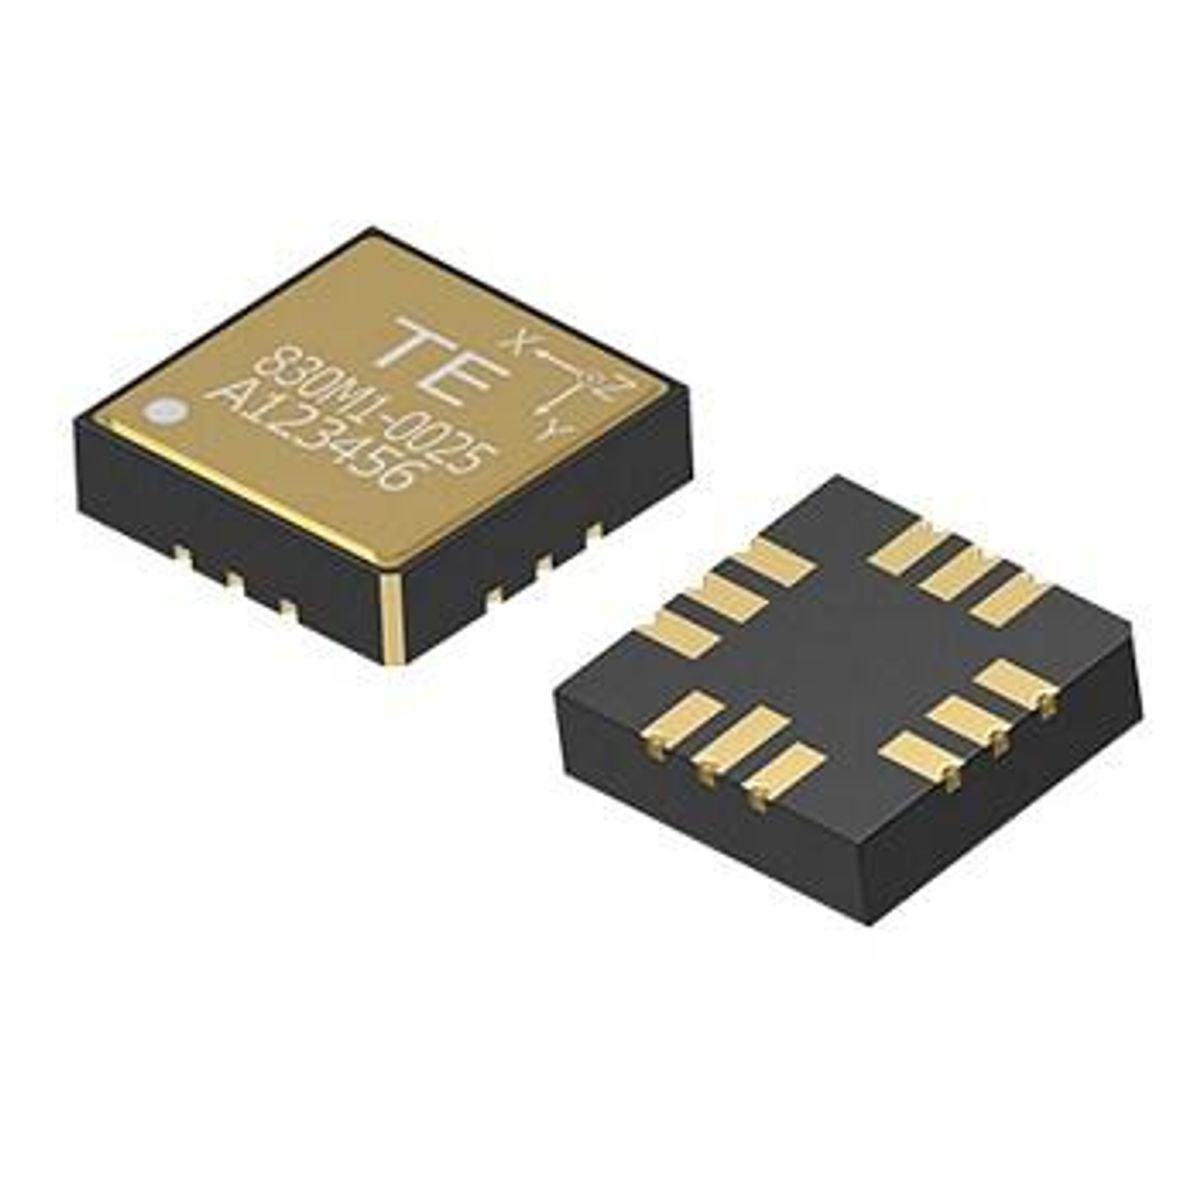 TE Connectivity’s 830M1 Triaxial Condition Monitoring Accelerometers